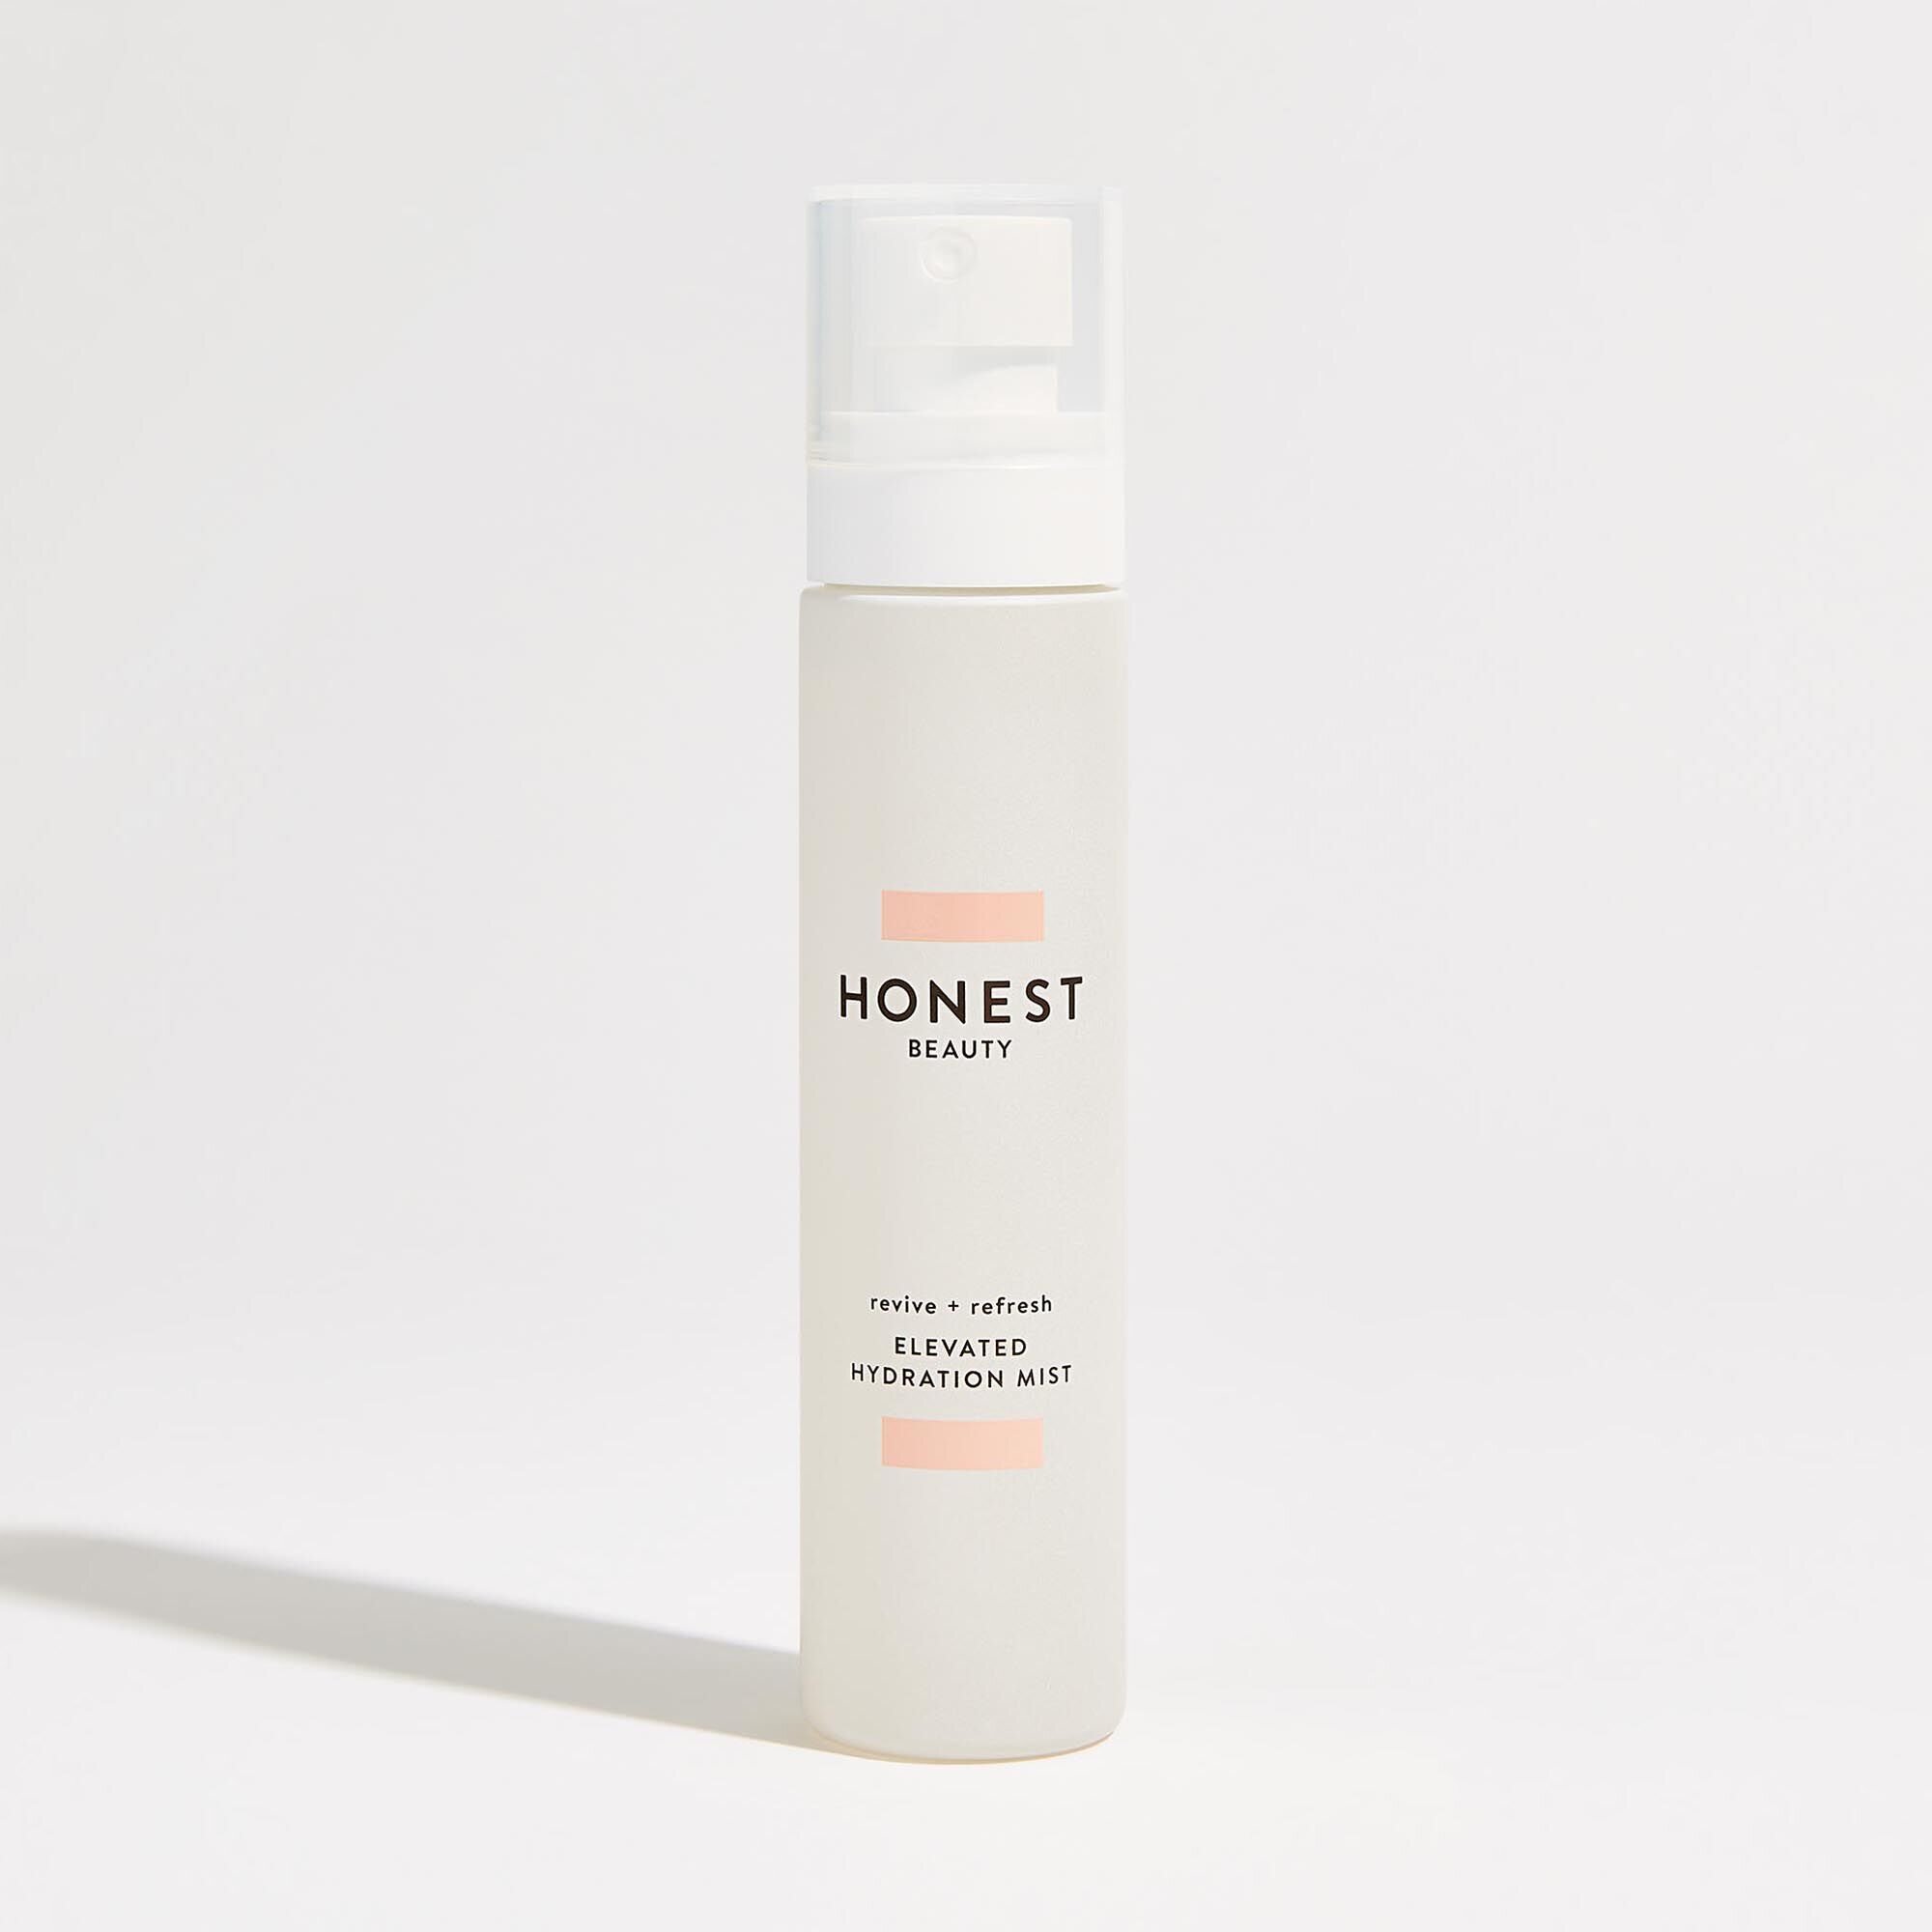 Honest Elevated Hydration Mist (Copy)